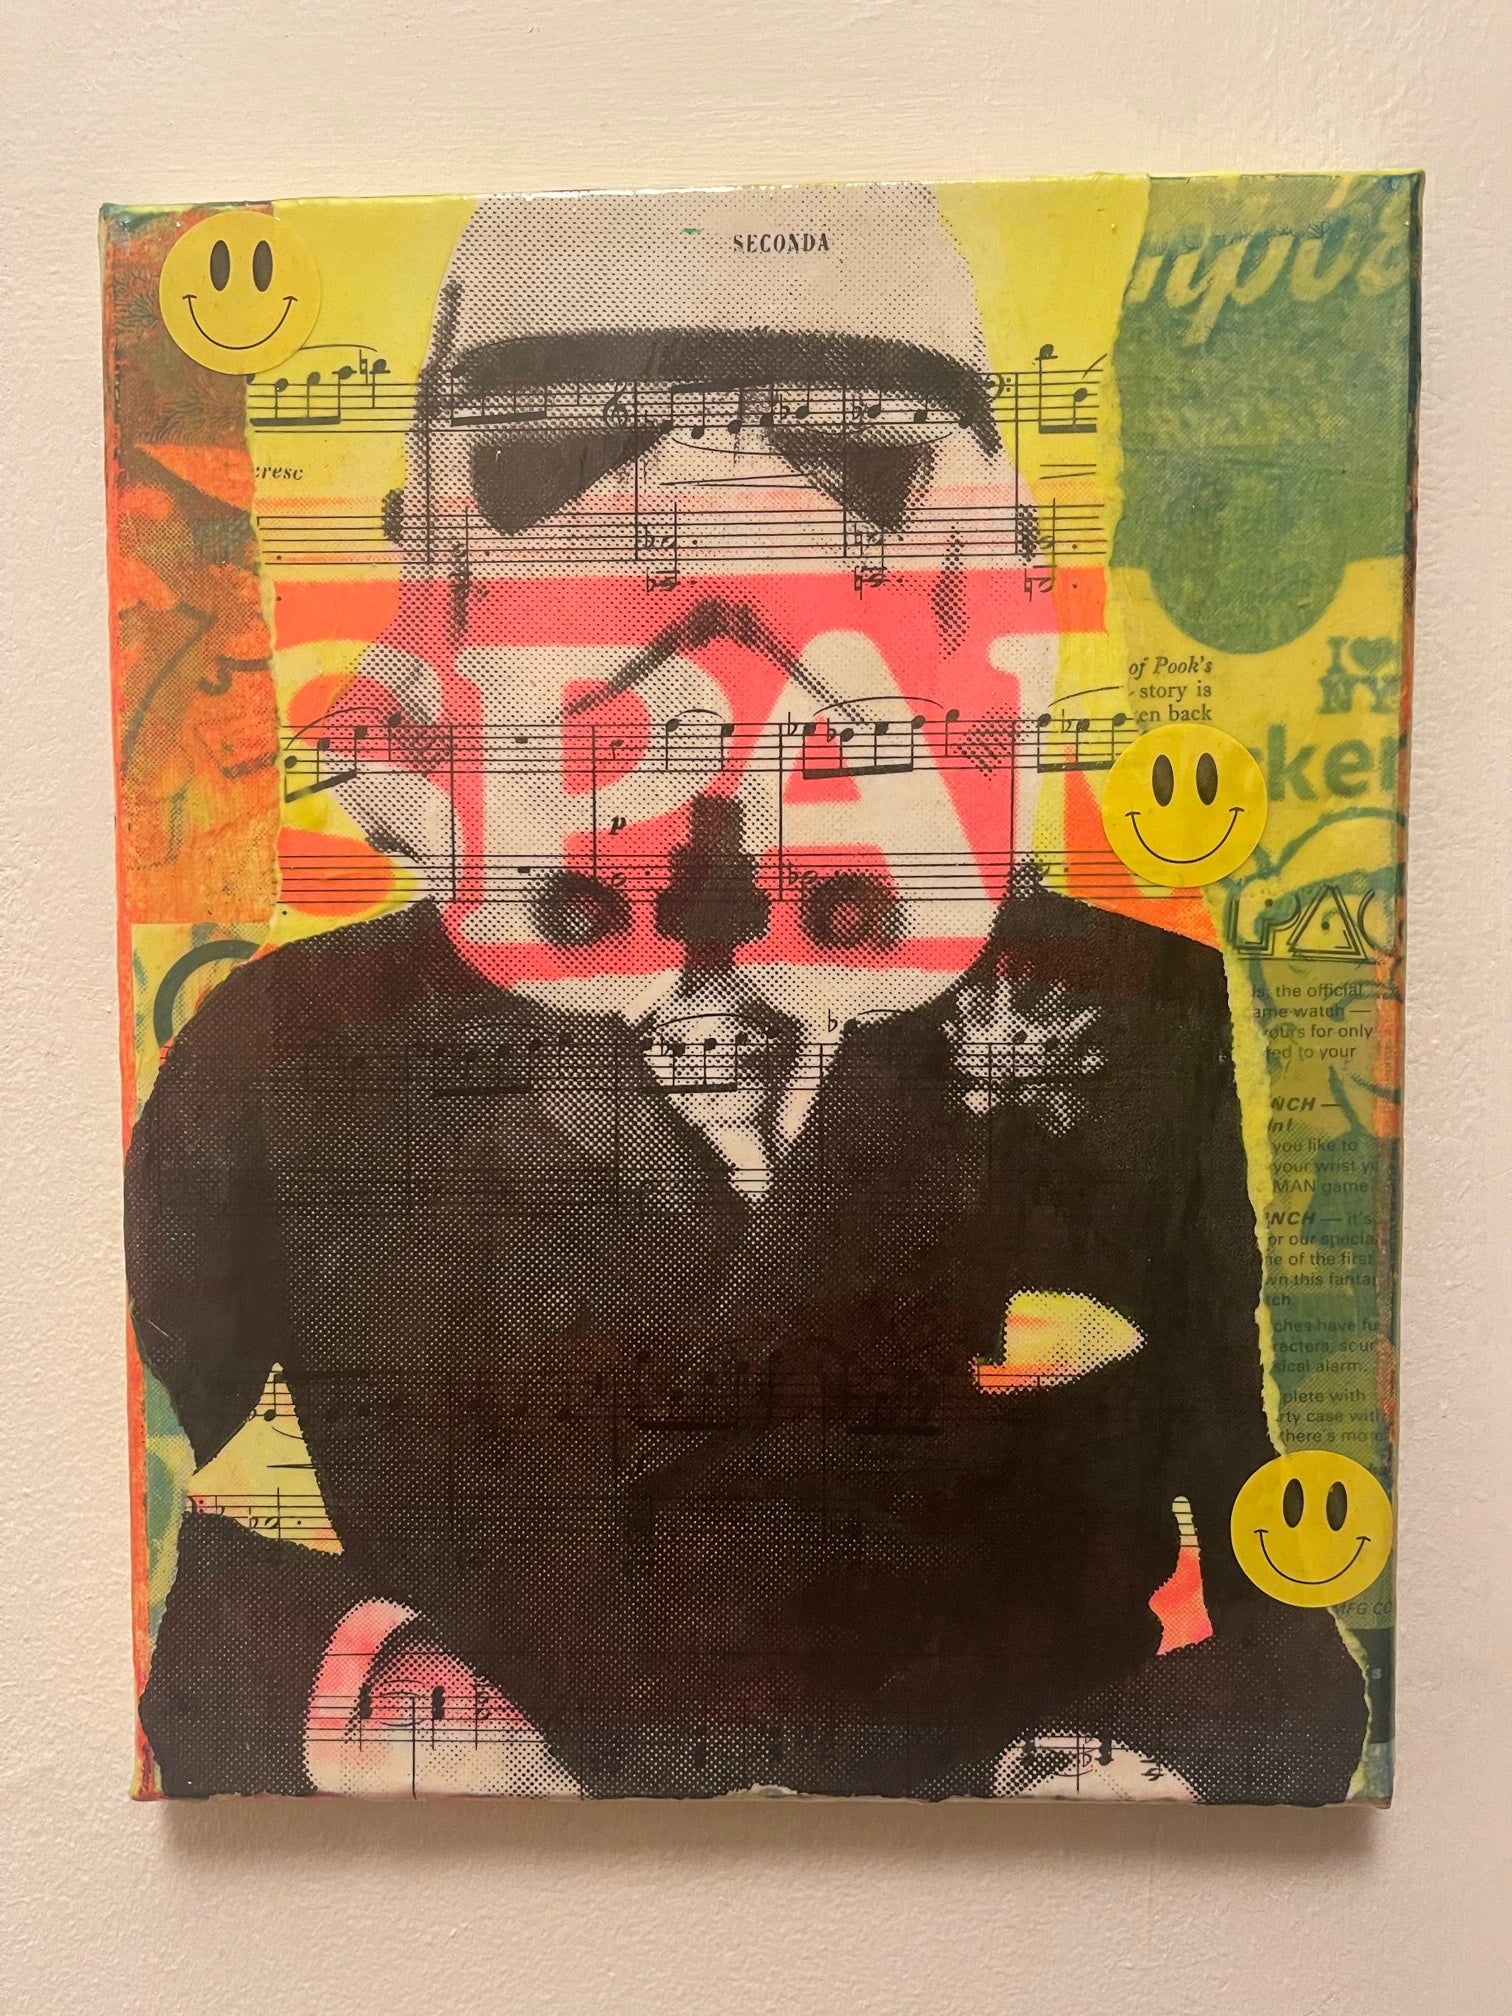 Spam Trooper Painting by Barrie J Davies 2021, Mixed media on Canvas, 25cm x 30cm, Unframed.